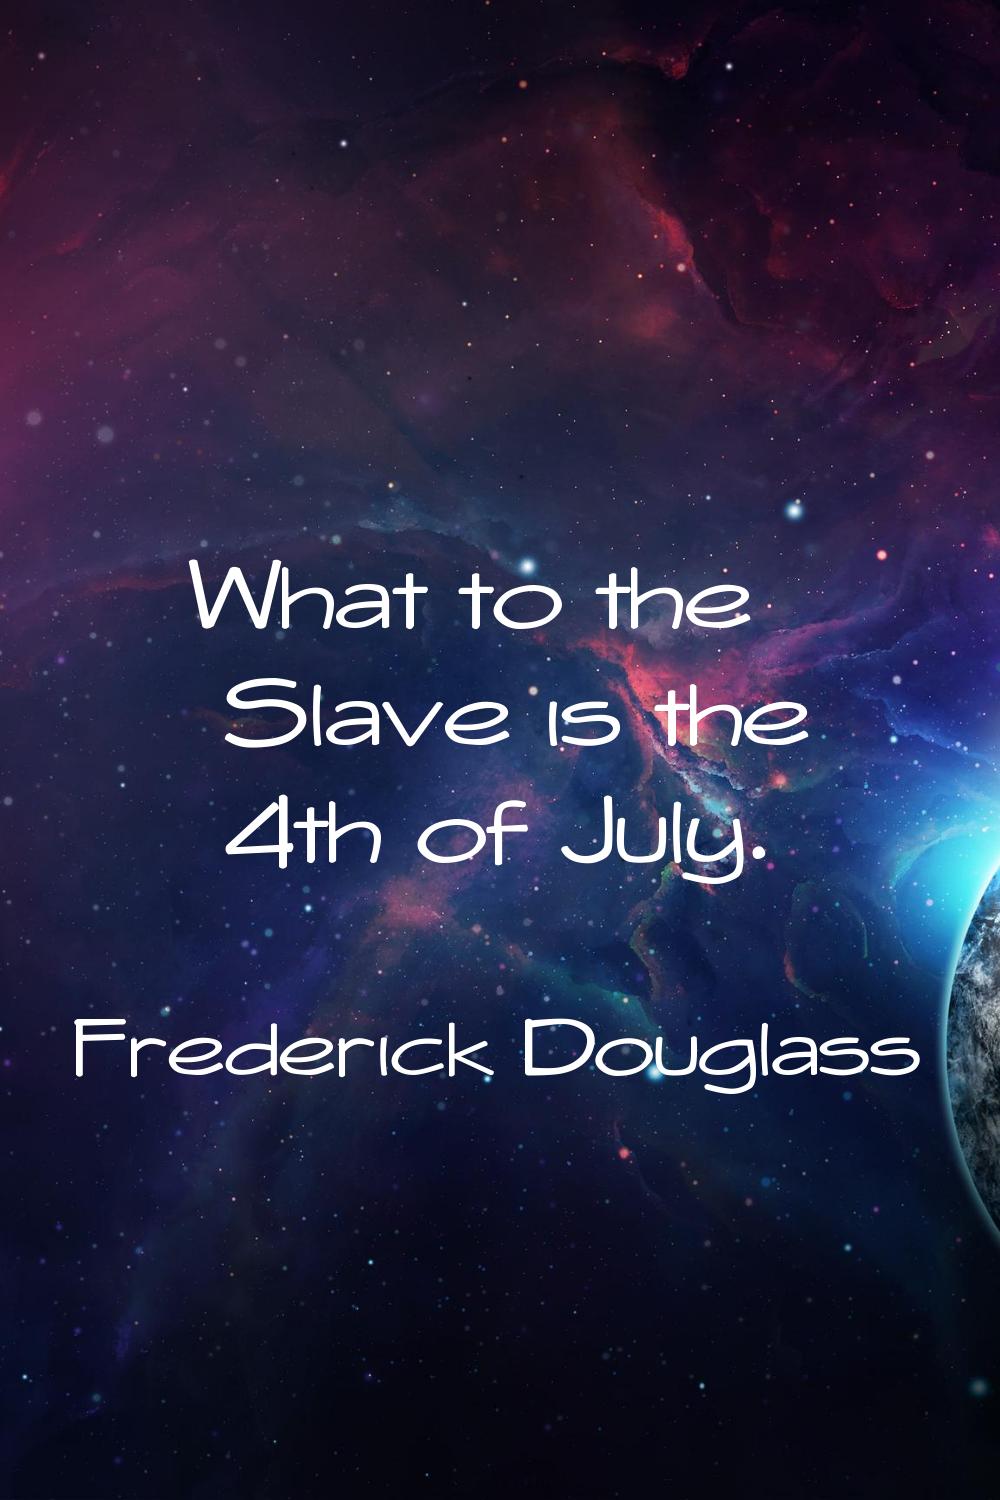 What to the Slave is the 4th of July.